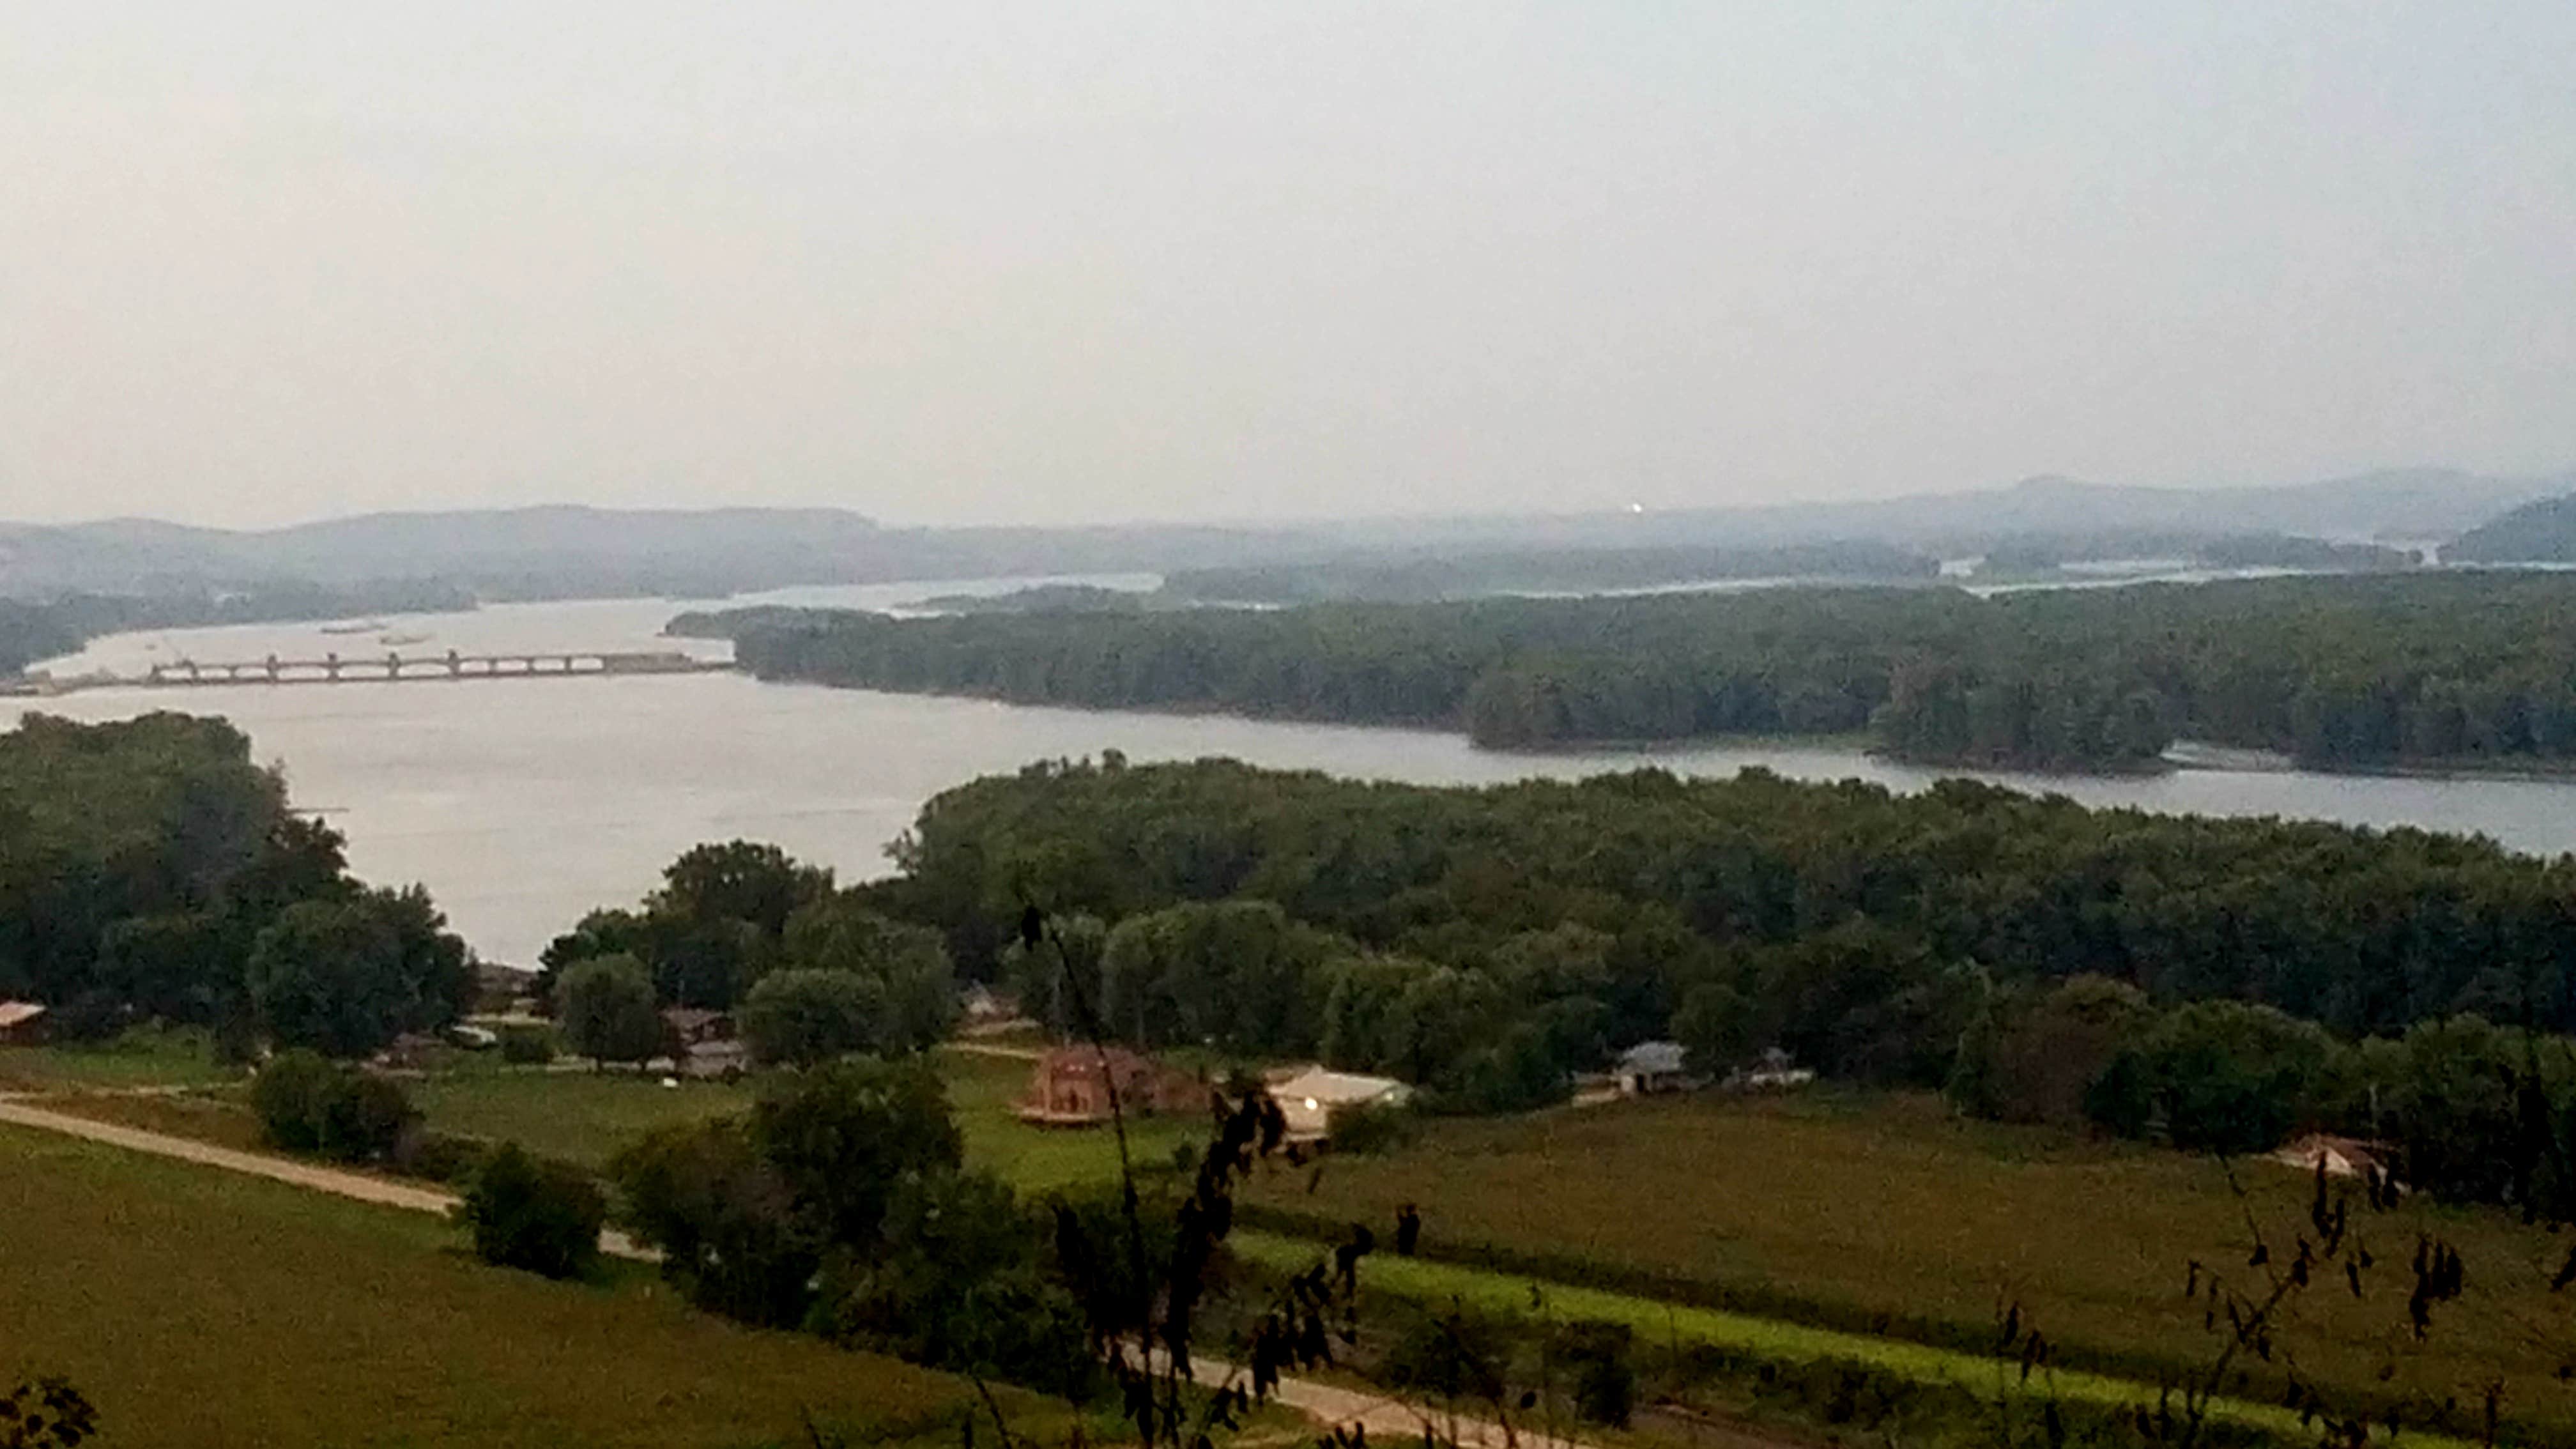 Nice view of the Mississippi River from East Shelter 